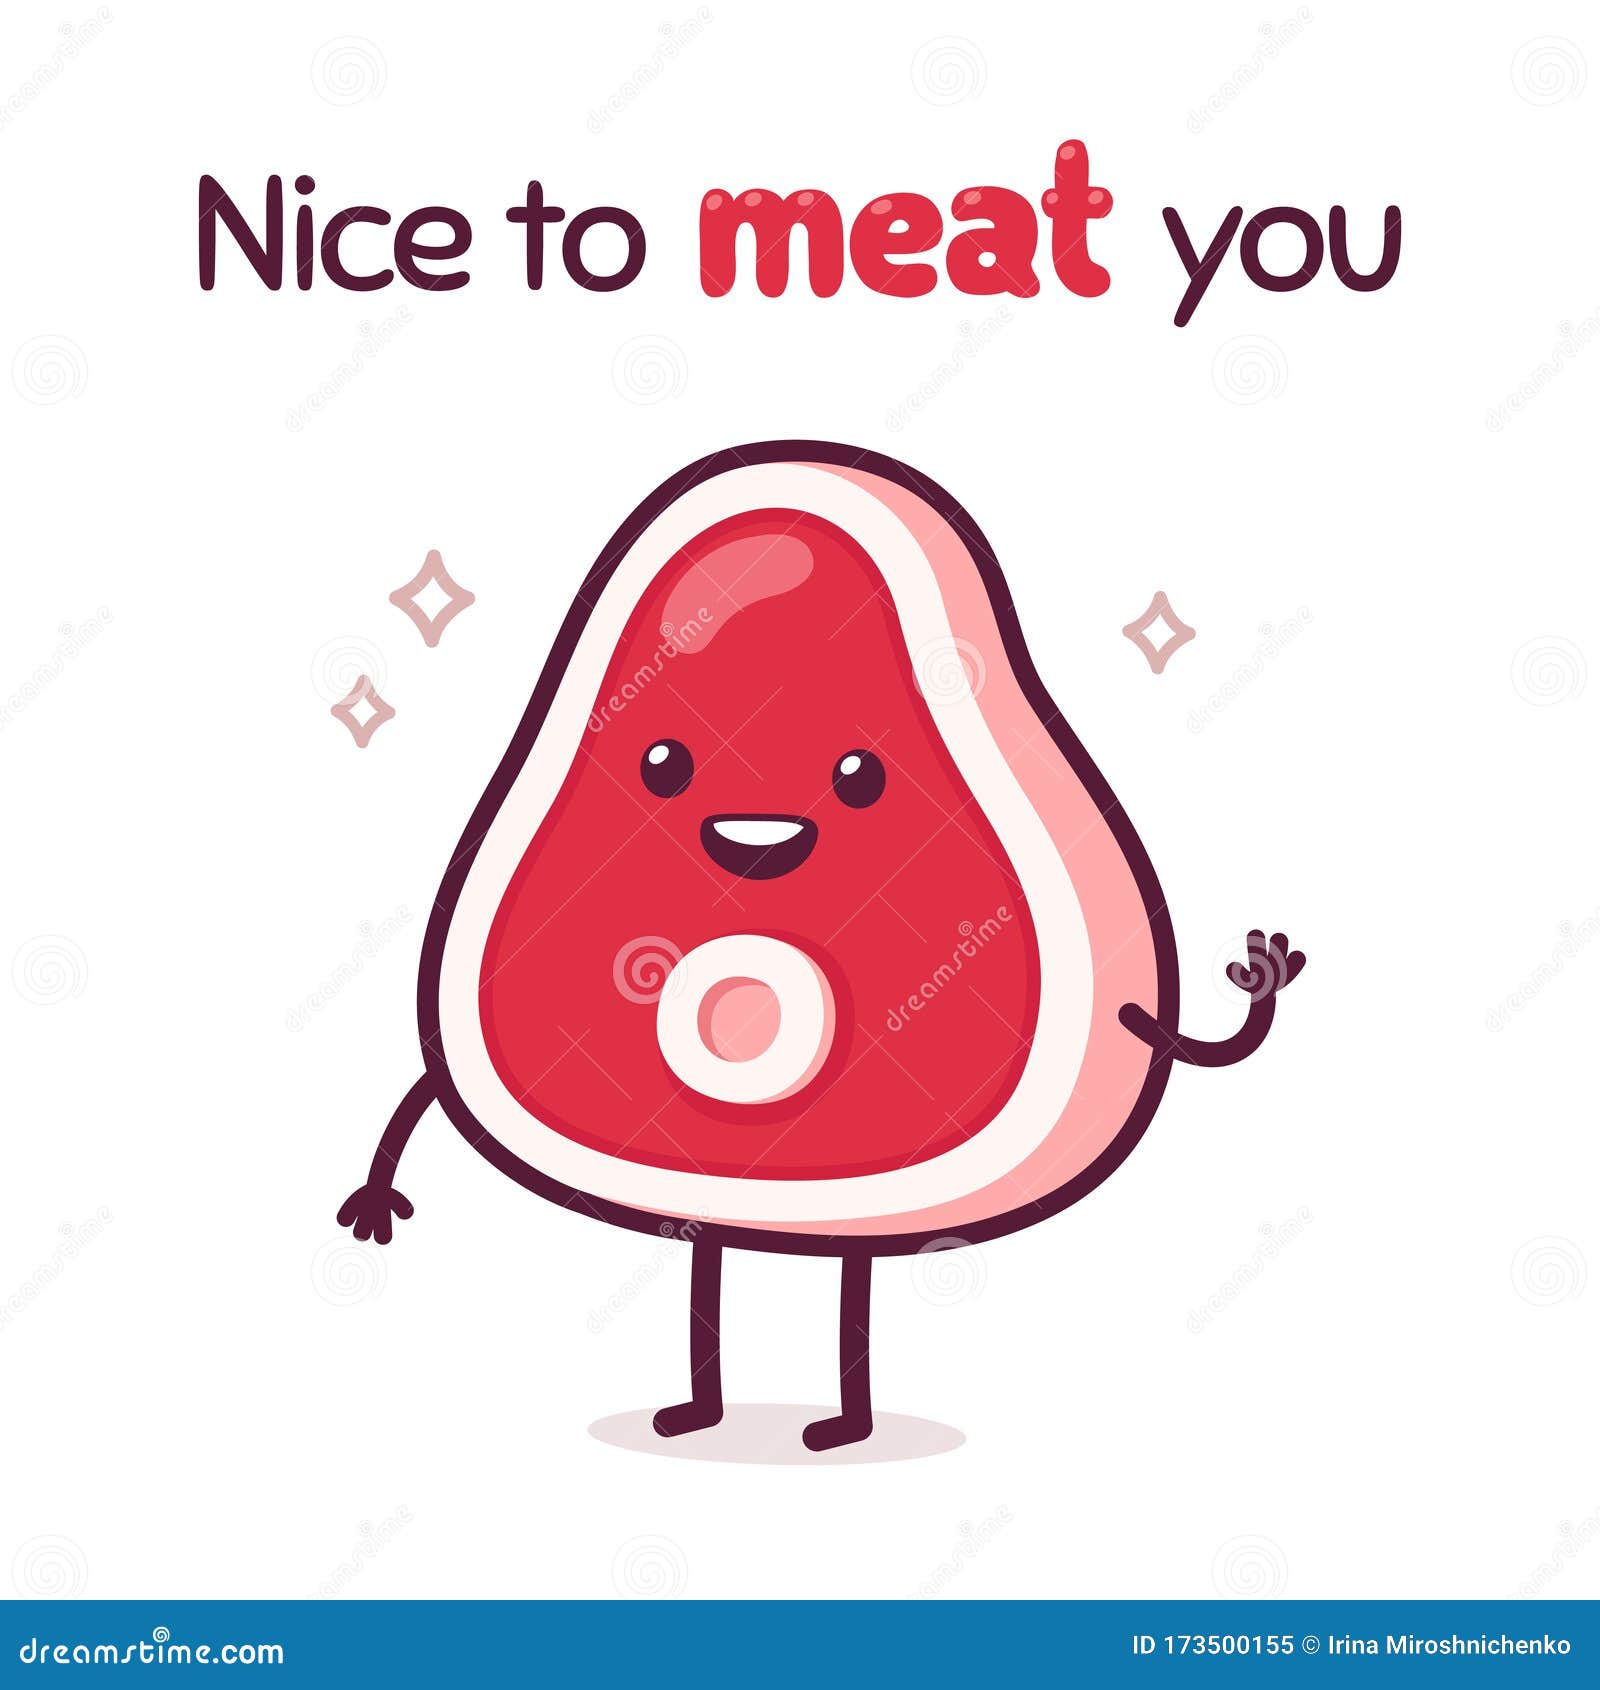 Nice To Meat You pun stock vector. Illustration of clipart - 173500155